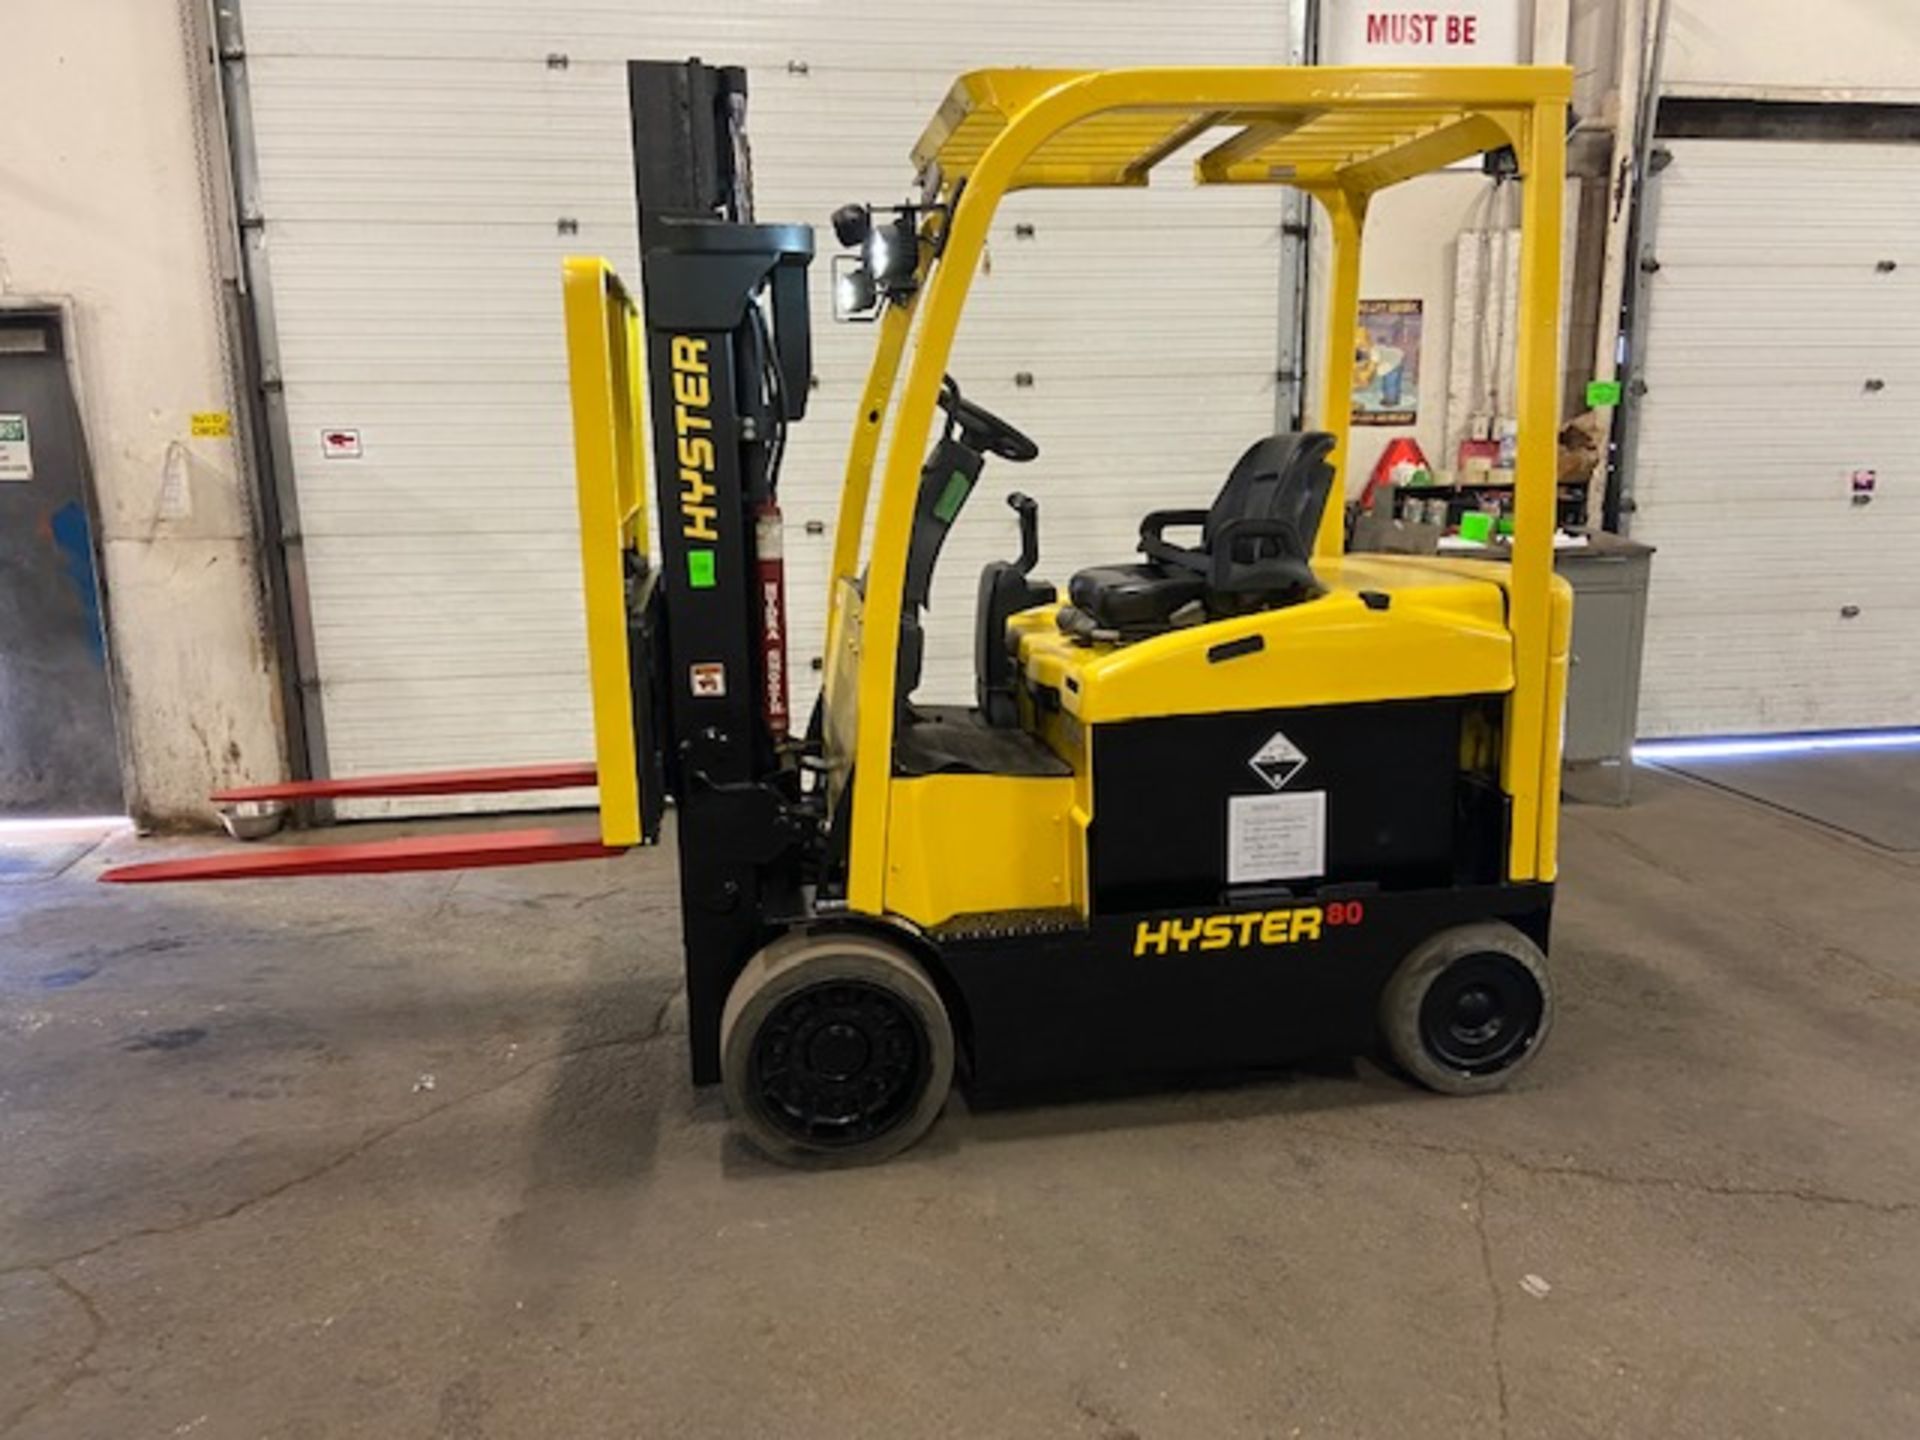 FREE CUSTOMS - 2014 Hyster 8000lbs Capacity Forklift Electric with sideshift NICE UNIT